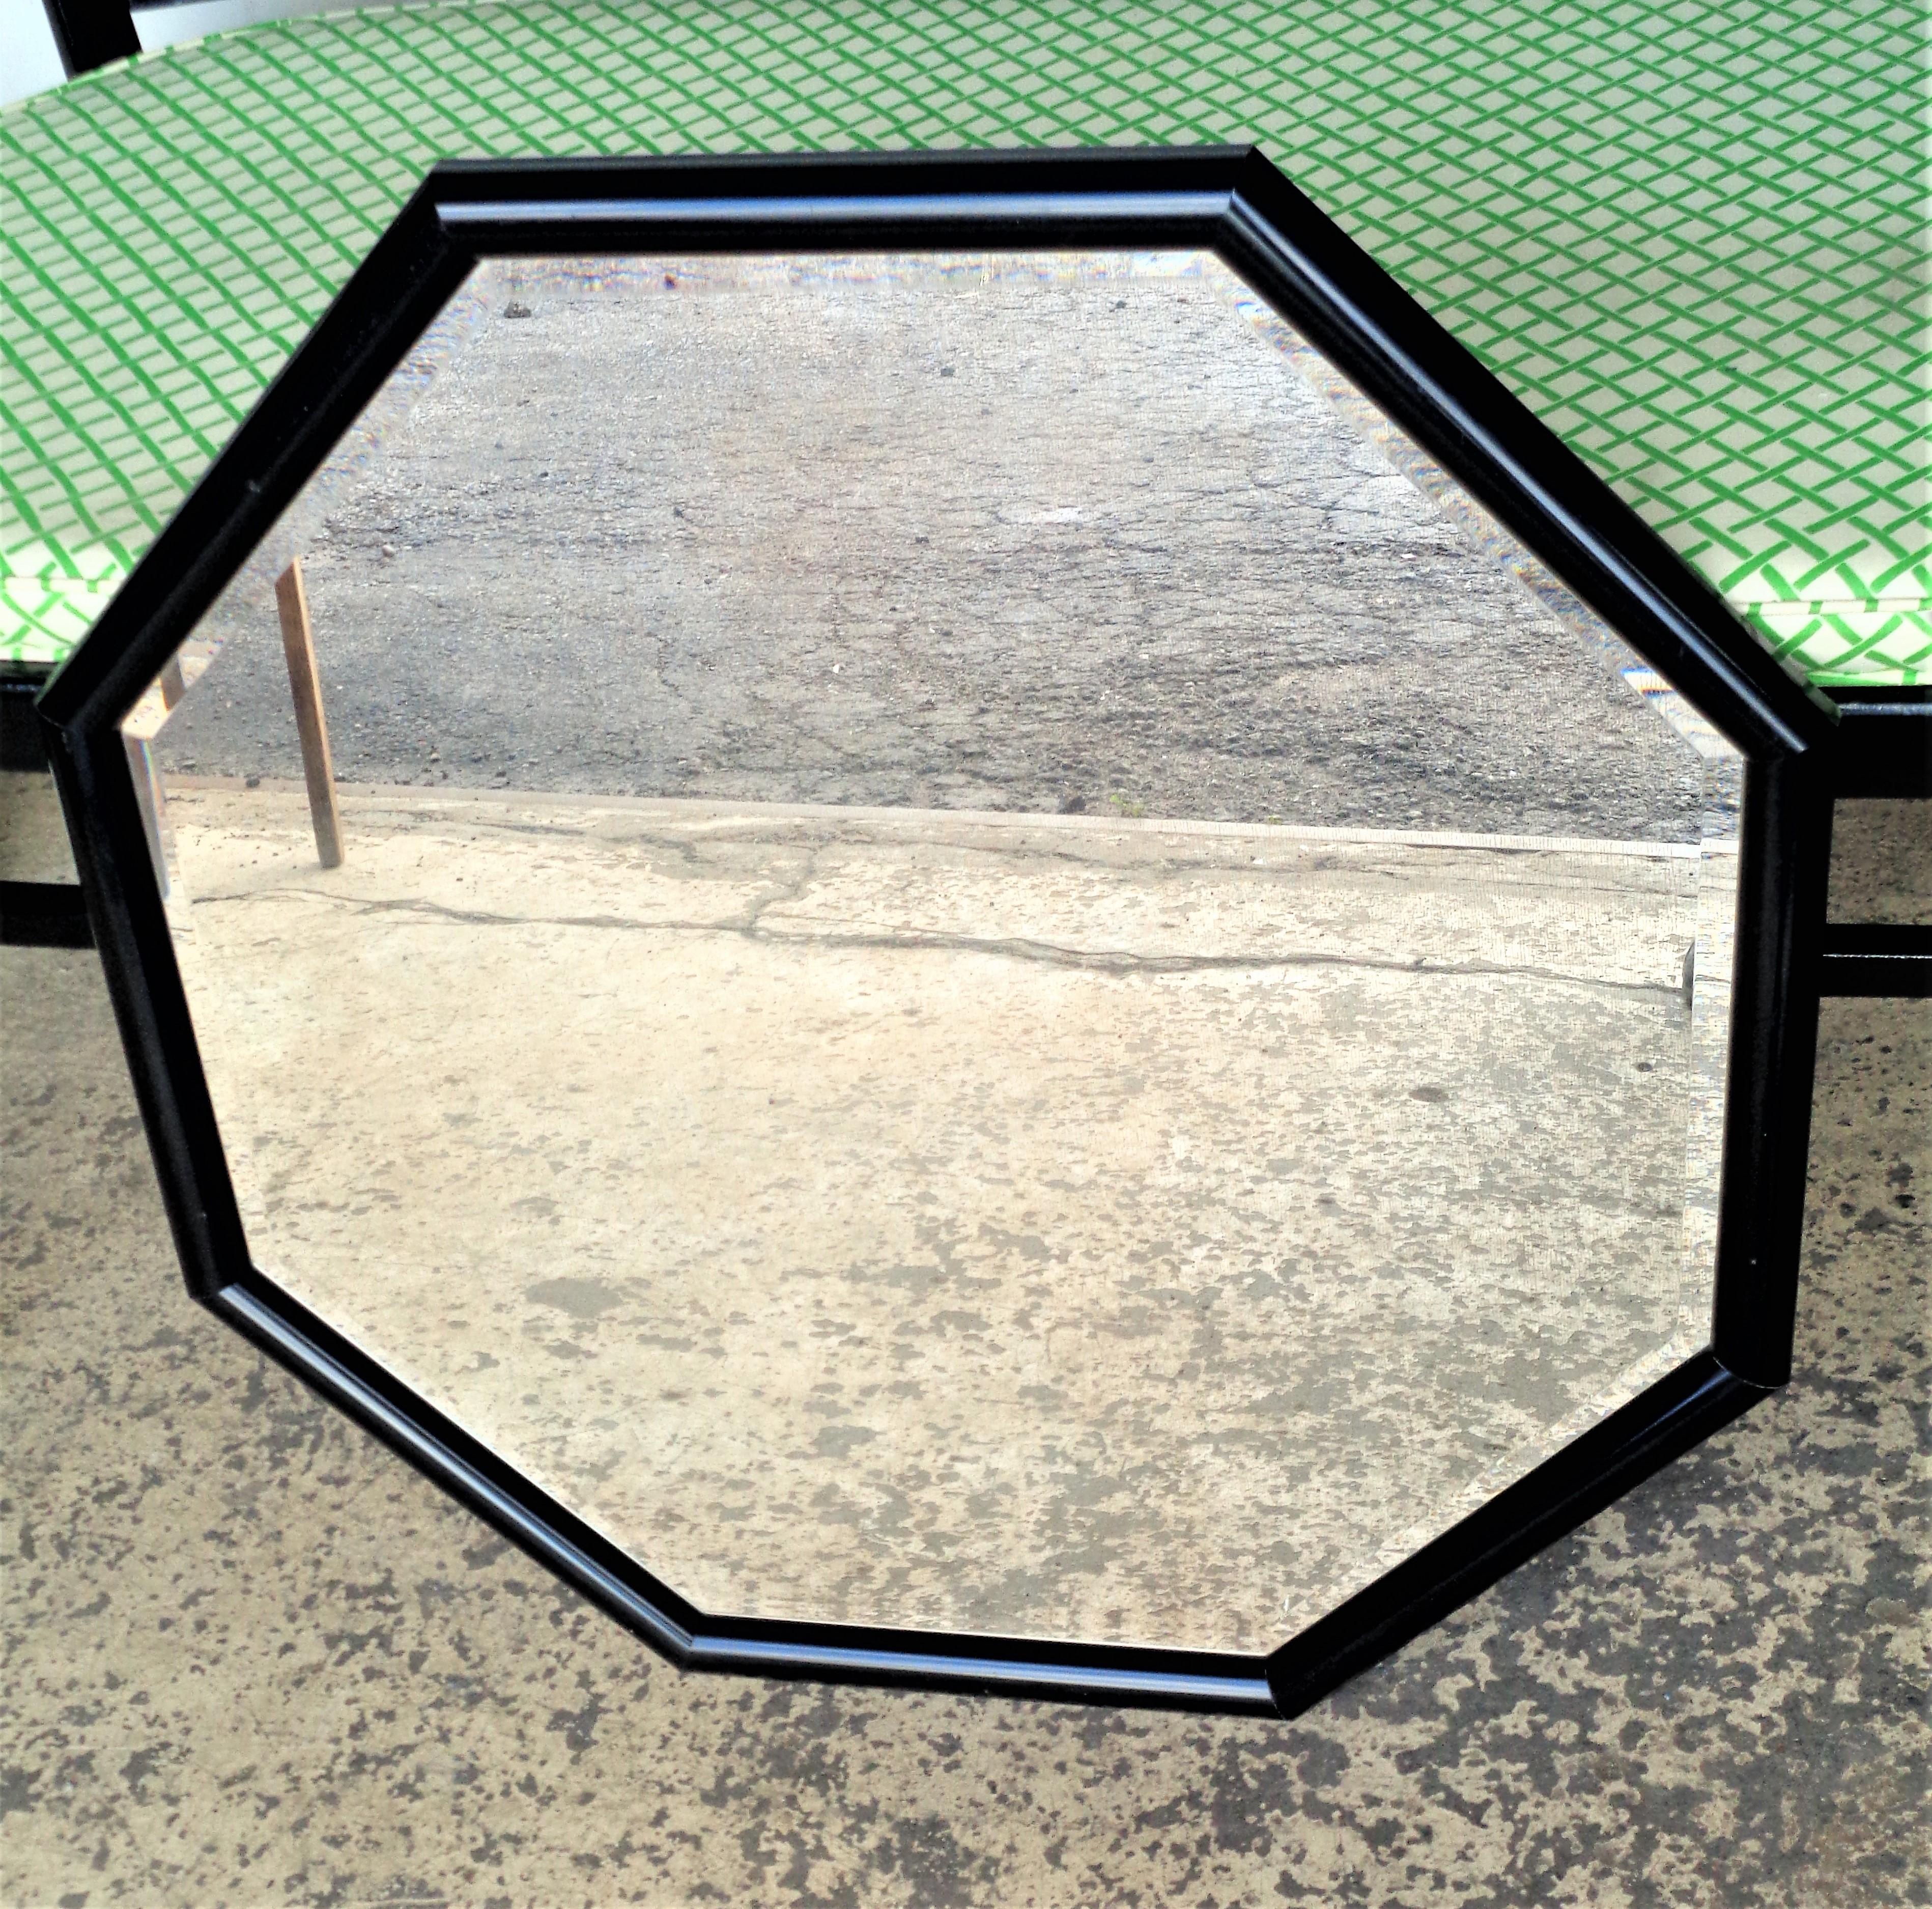 High gloss black acrylic coated minimalist designed octagonal framed beveled glass wall mirror, circa 1970's. Look at all pictures and read condition report in comment section.